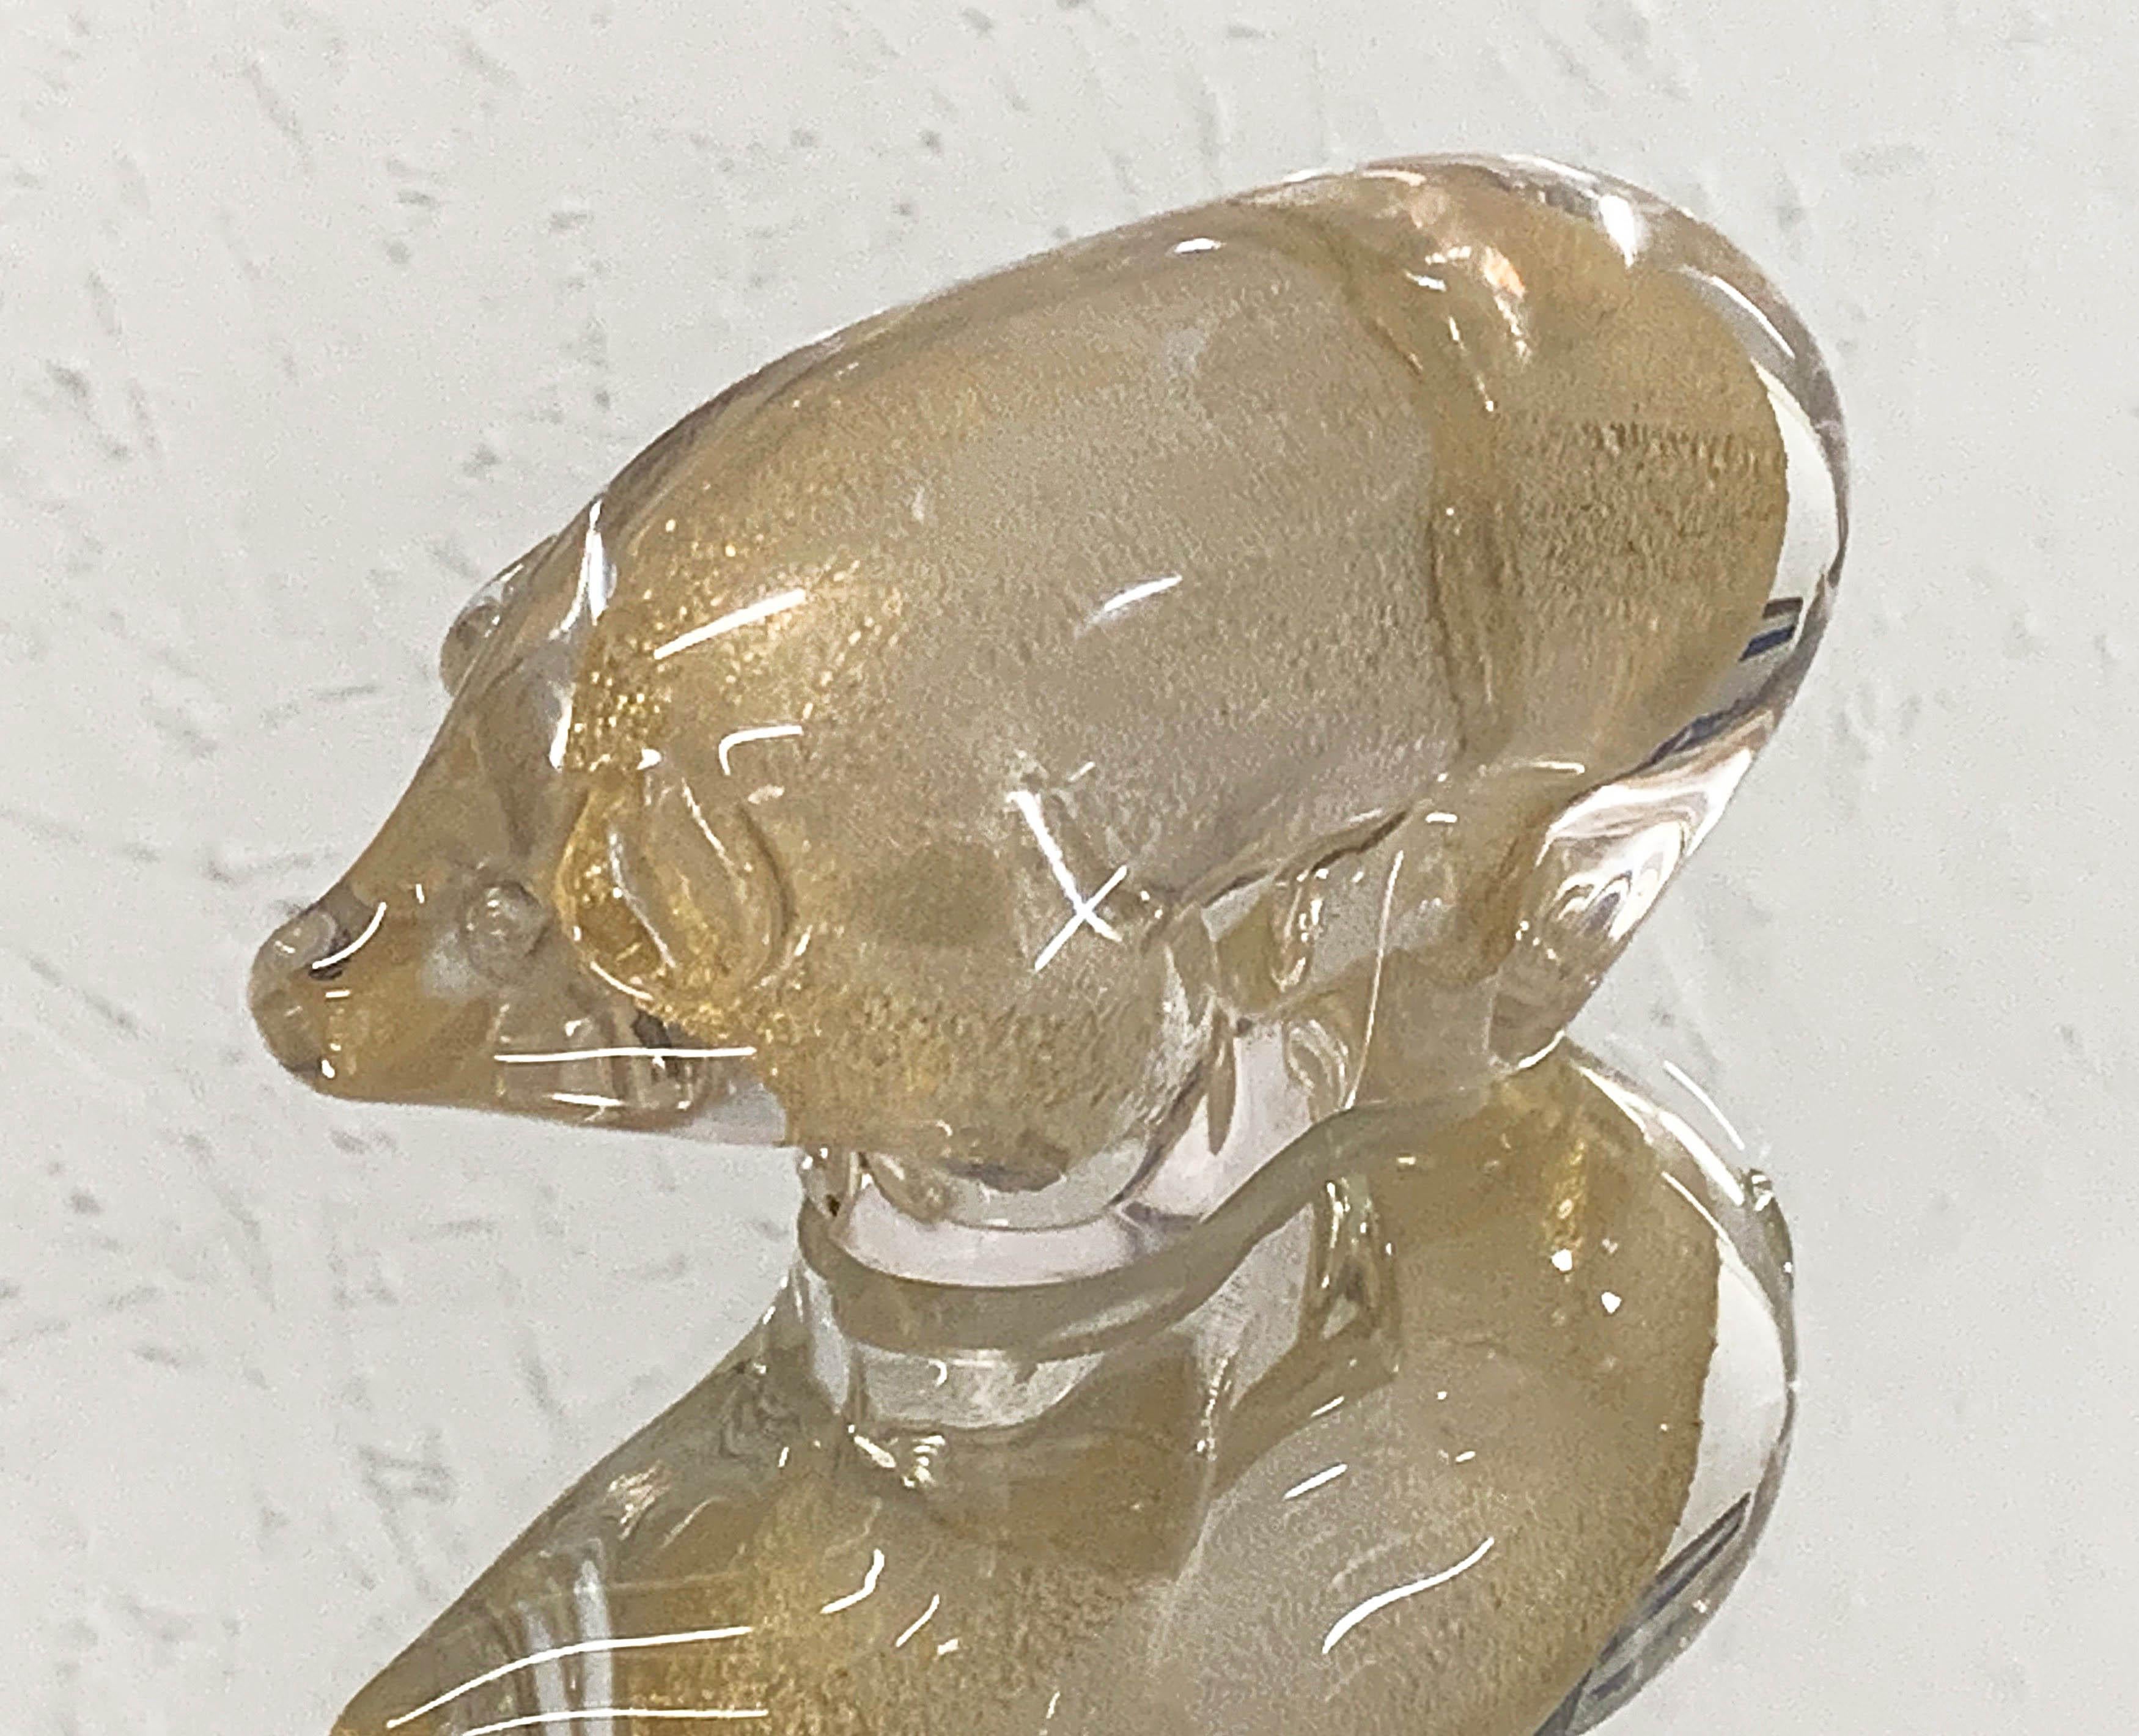 Mid-Century Modern Archimede Seguso Midcentury Pig Murano Glass Italian Sculpture with Golden Dots